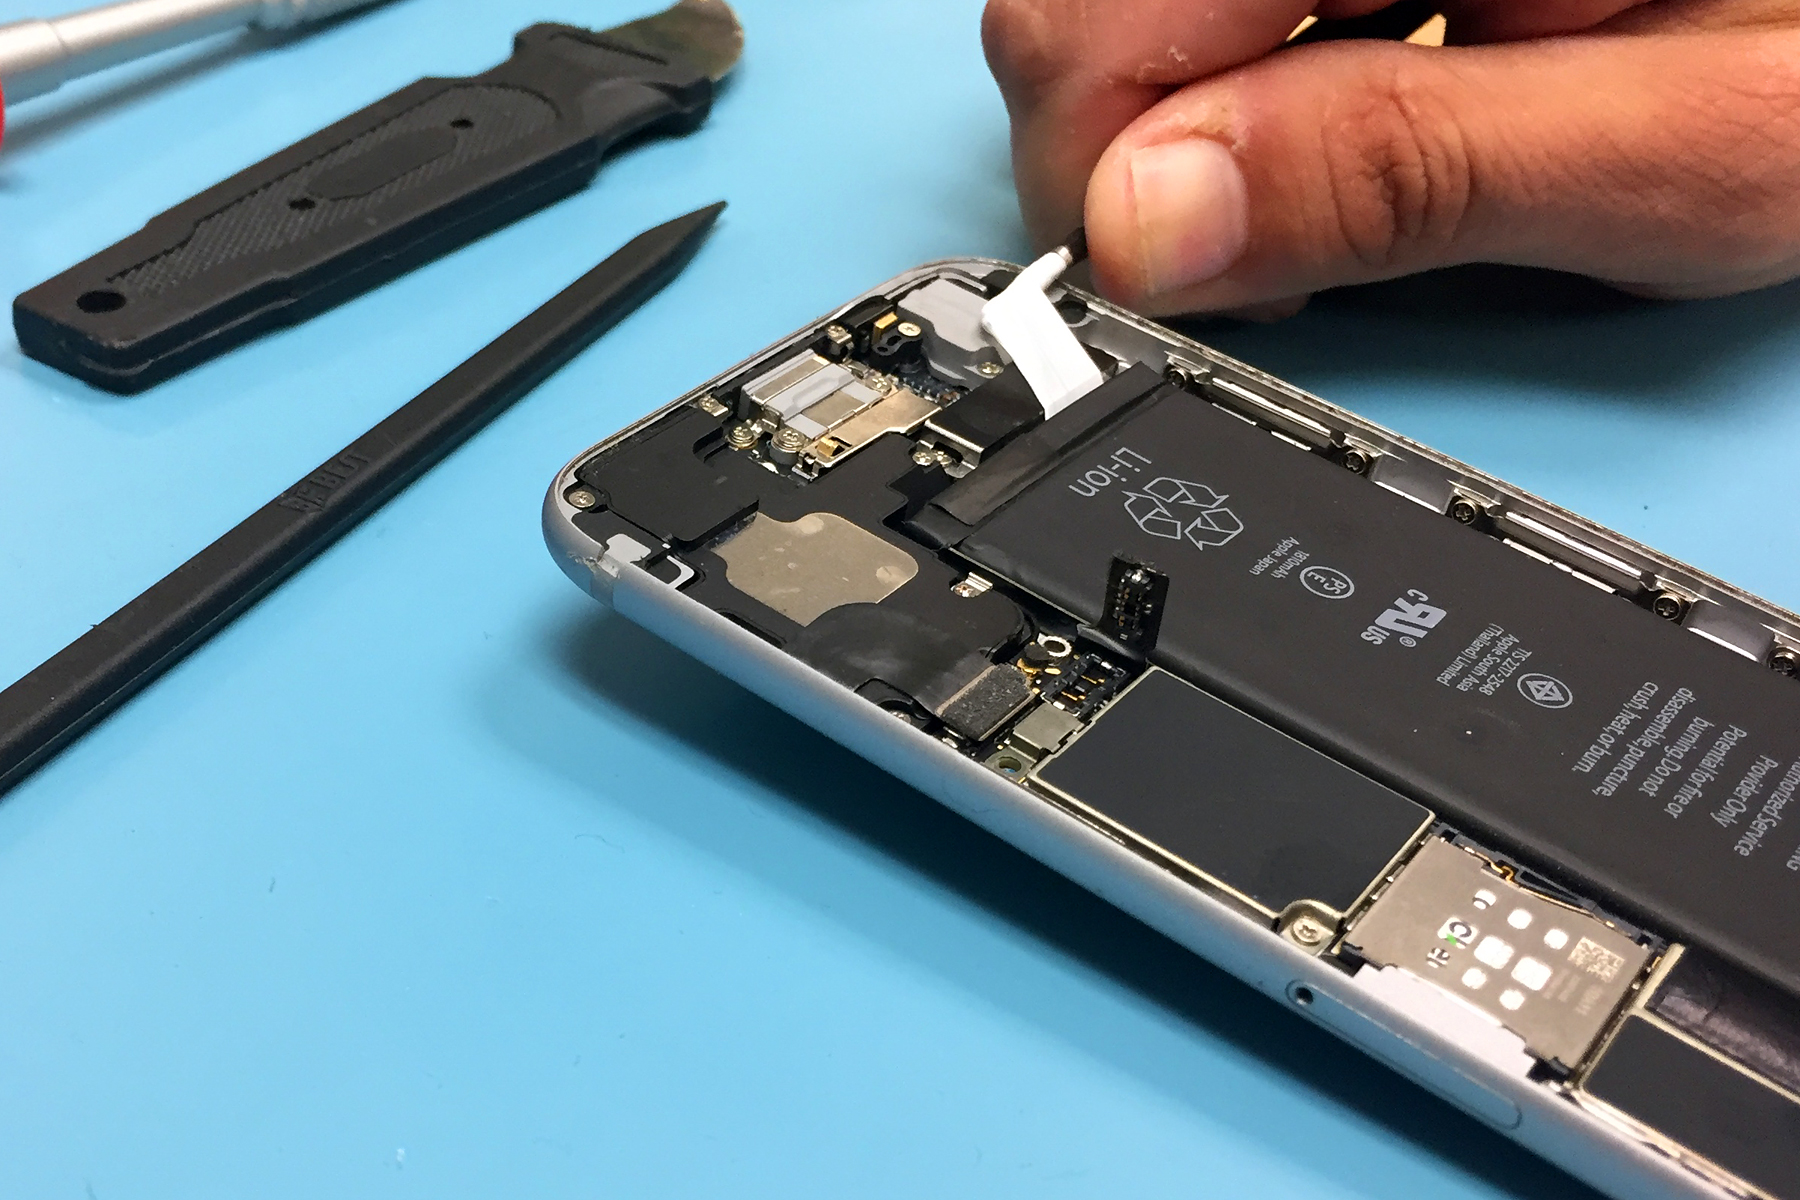 https://www.imore.com/sites/imore.com/files/styles/large/public/field/image/2018/03/iphone%206%20battery%20repair%20step%20_10_.jpg?itok=8ayjfXOT